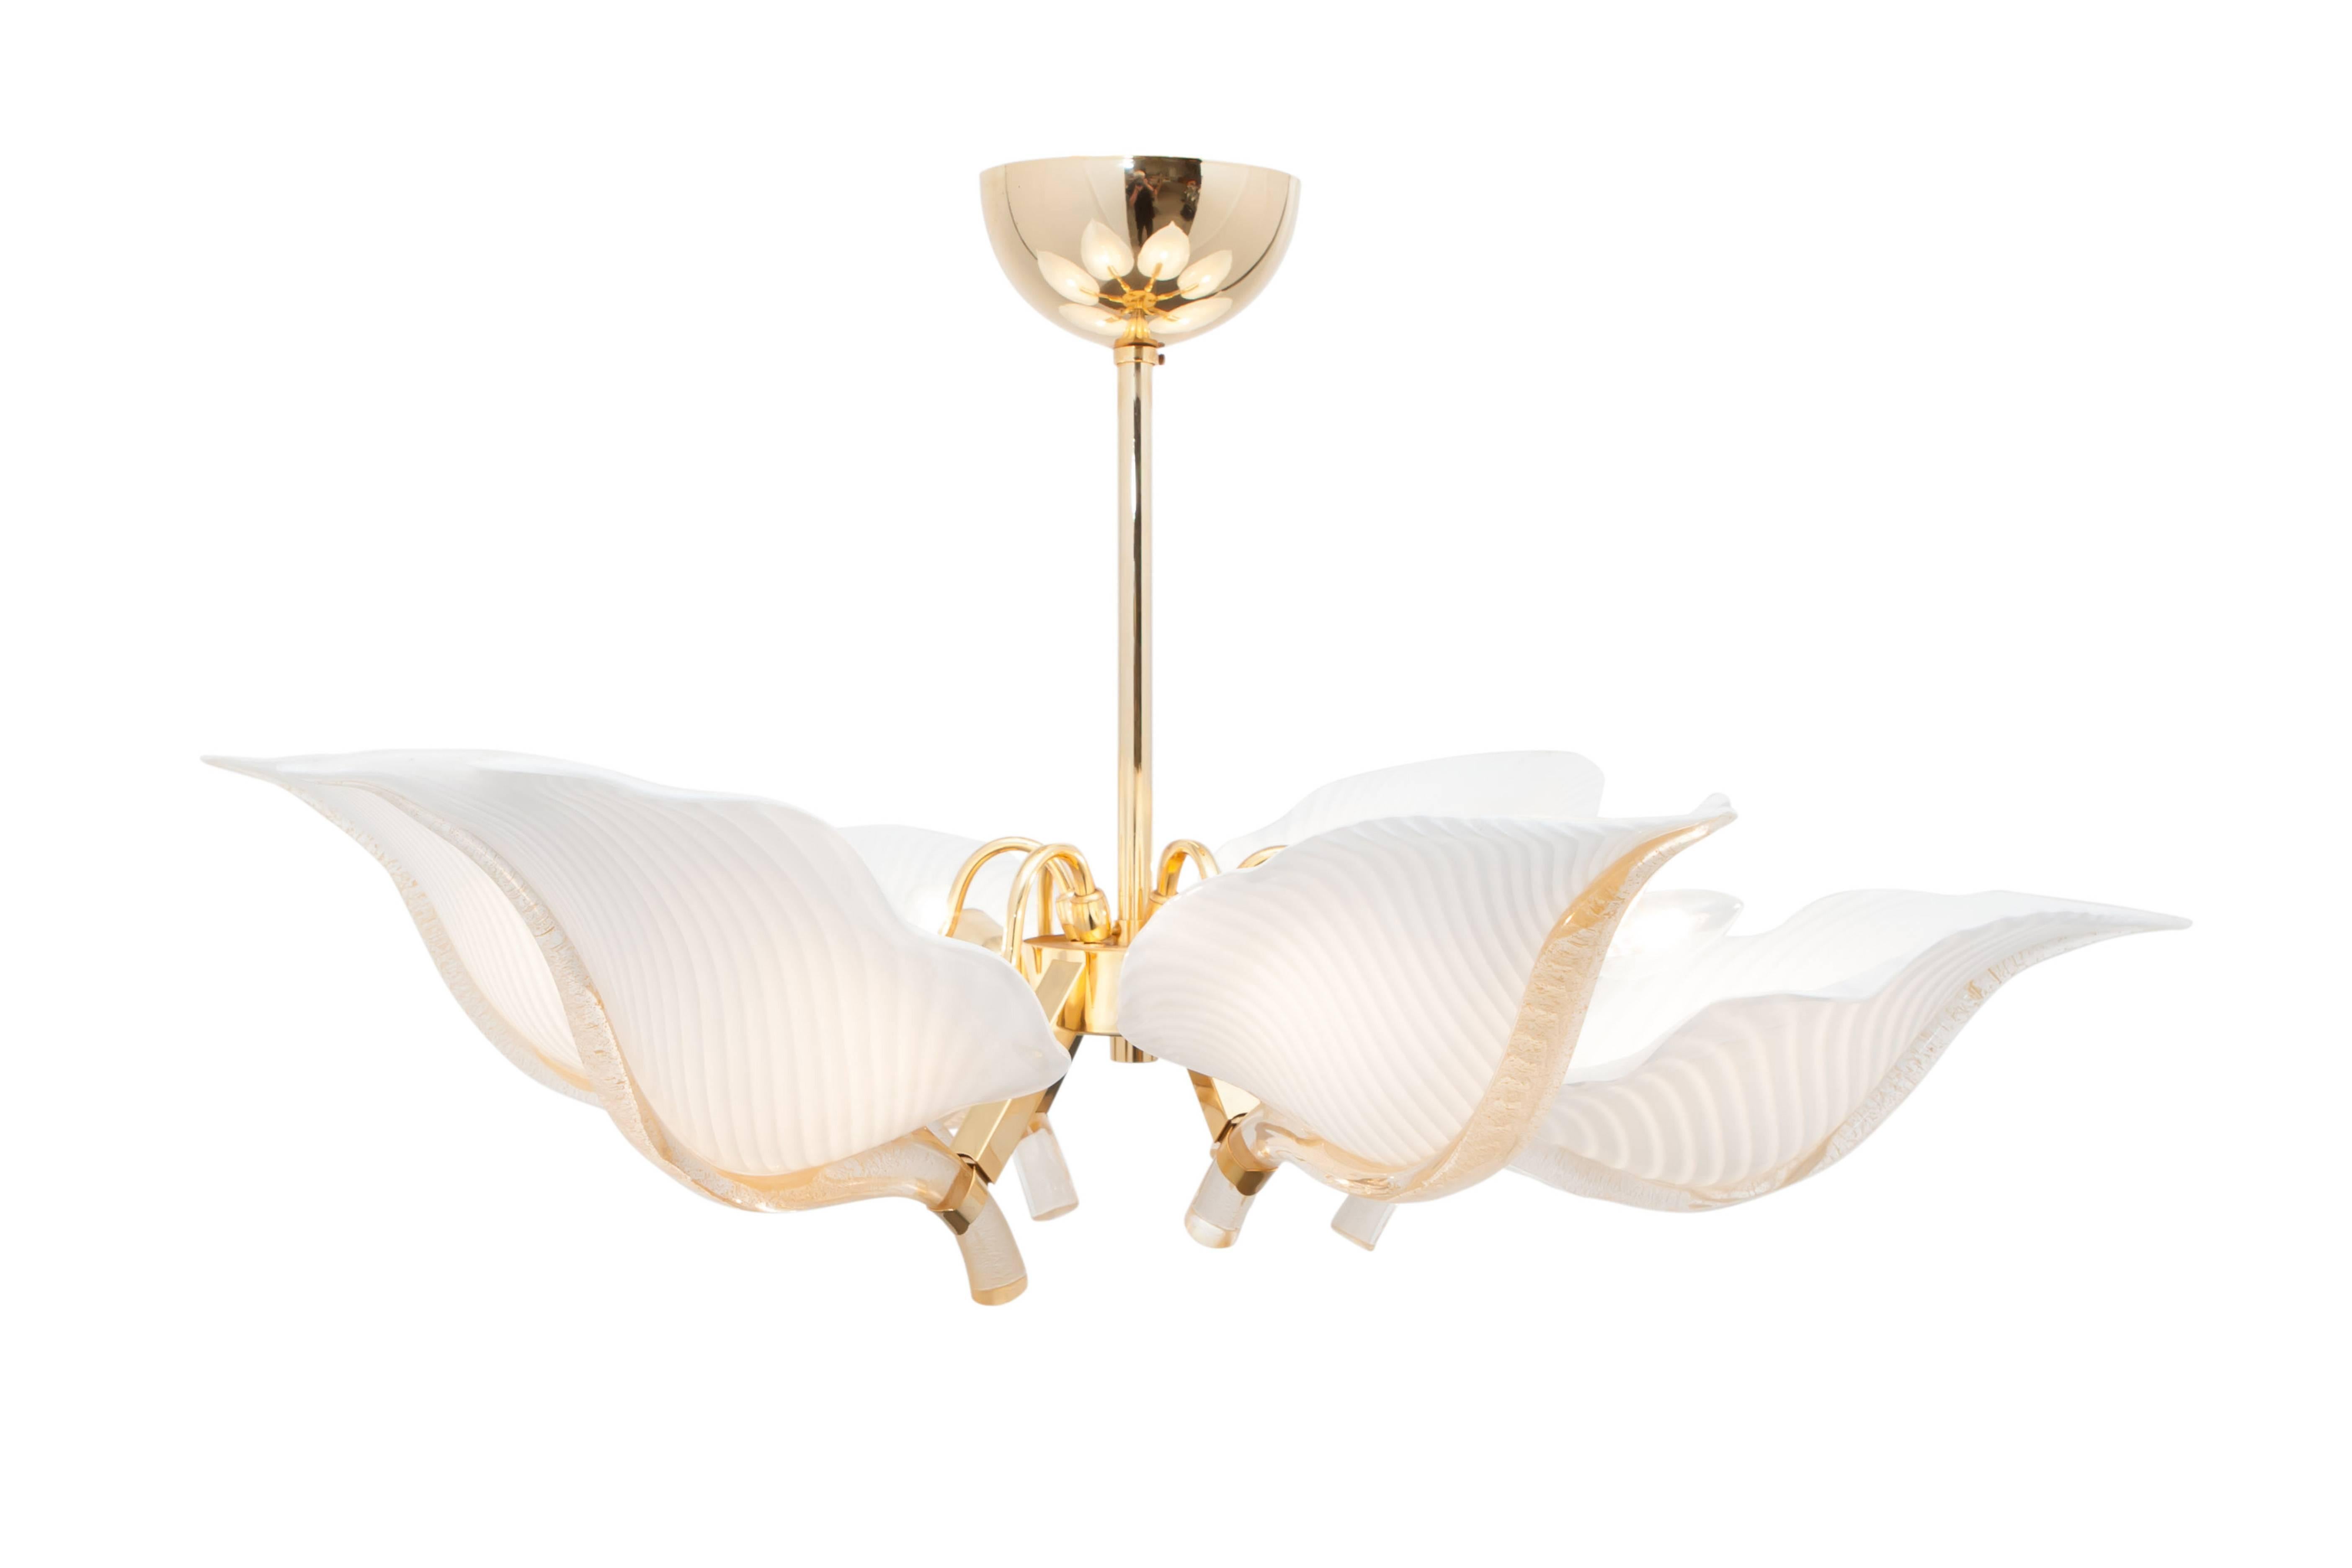 1970s chic chandelier with handblown glass leaves.
Brass frame.
By Franco Luce, Italy.
Measures: Ø 90 cm, H 75 cm.